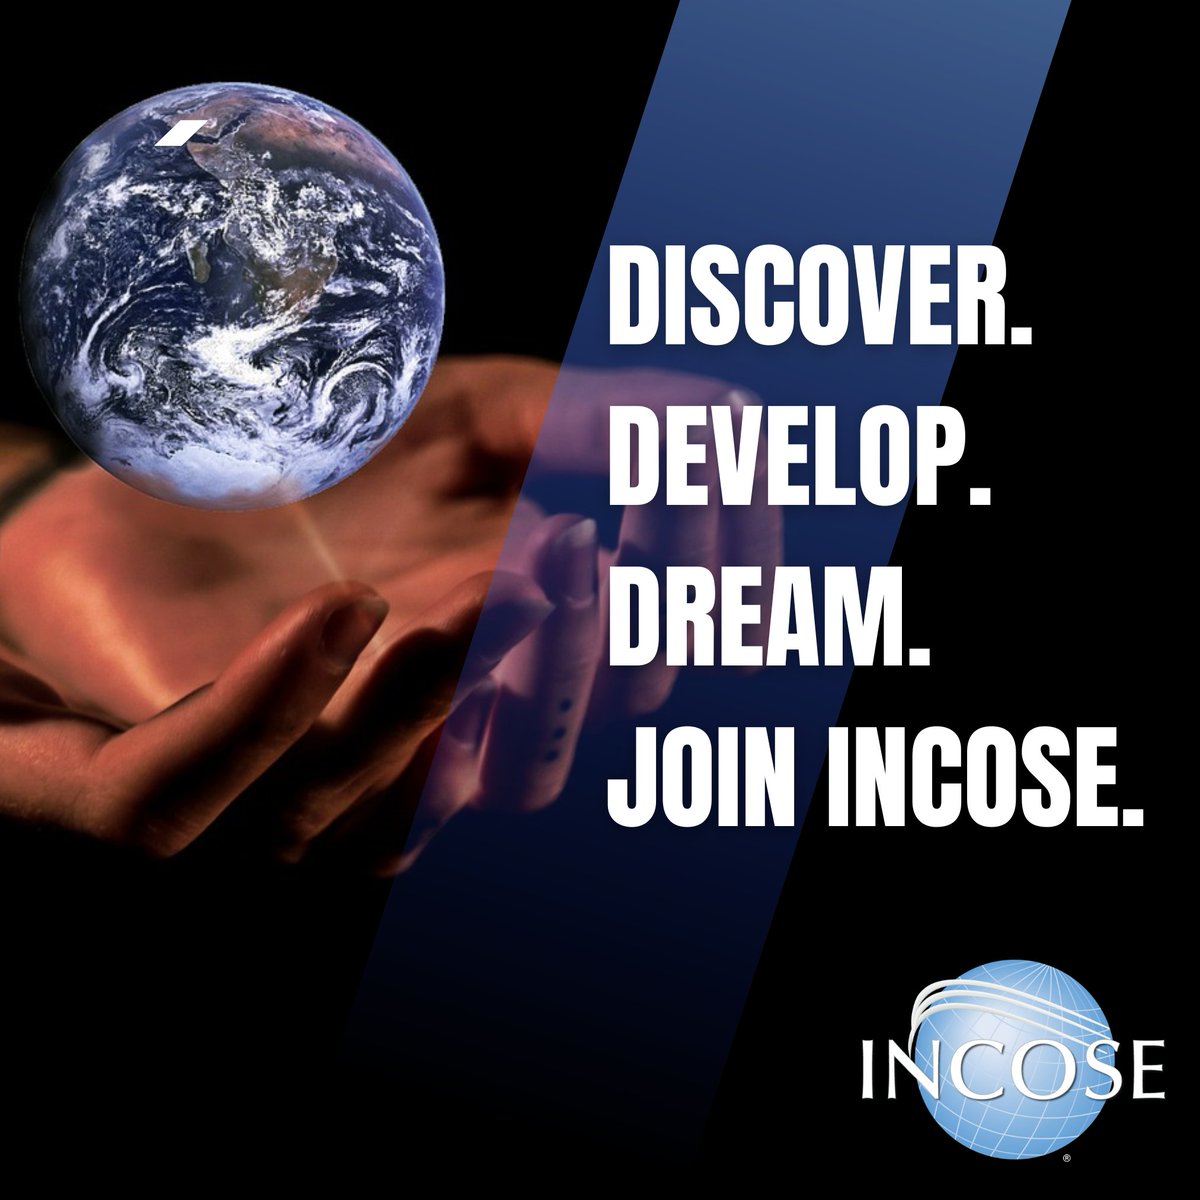 Dreaming of a better tomorrow? Join INCOSE and become part of a global network of systems engineering professionals driving change across industries. Together, we can build a better future.

Join INCOSE today at bit.ly/4bbu97W 

#INCOSE #SystemsEngineer